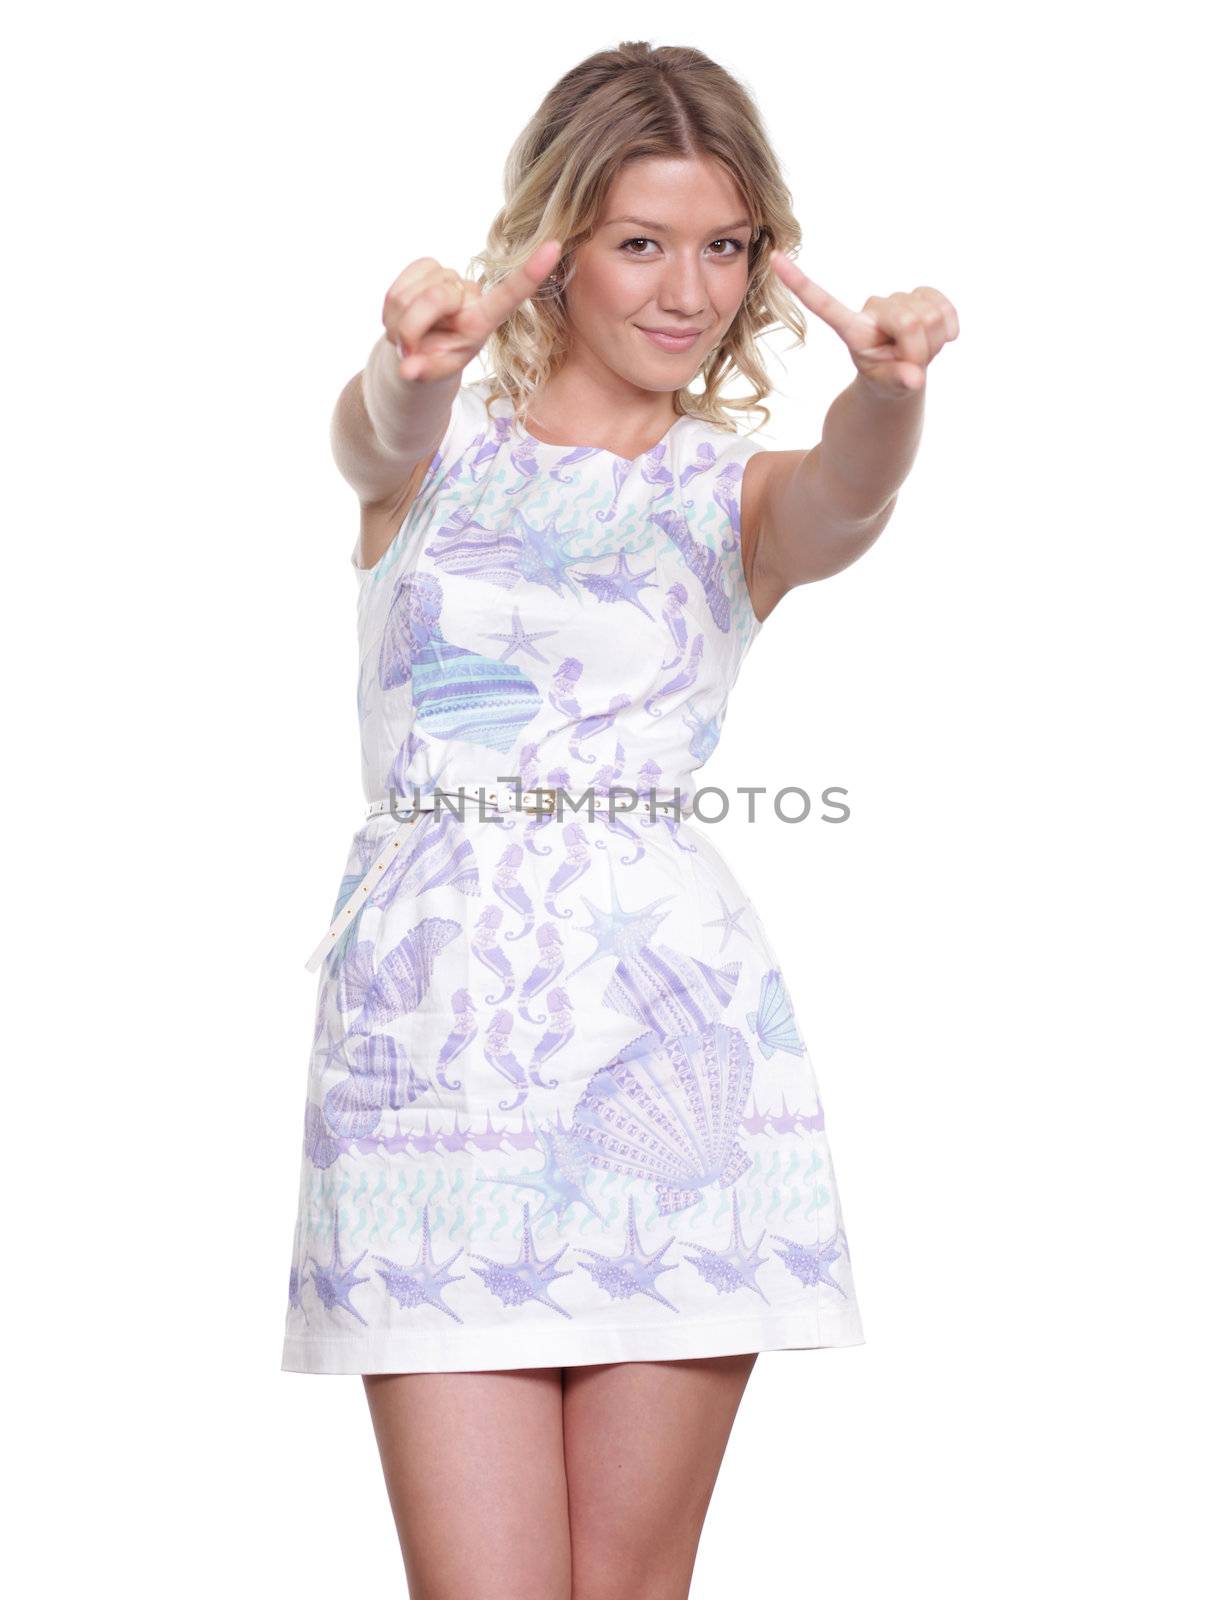 Happy young woman in sexy dress